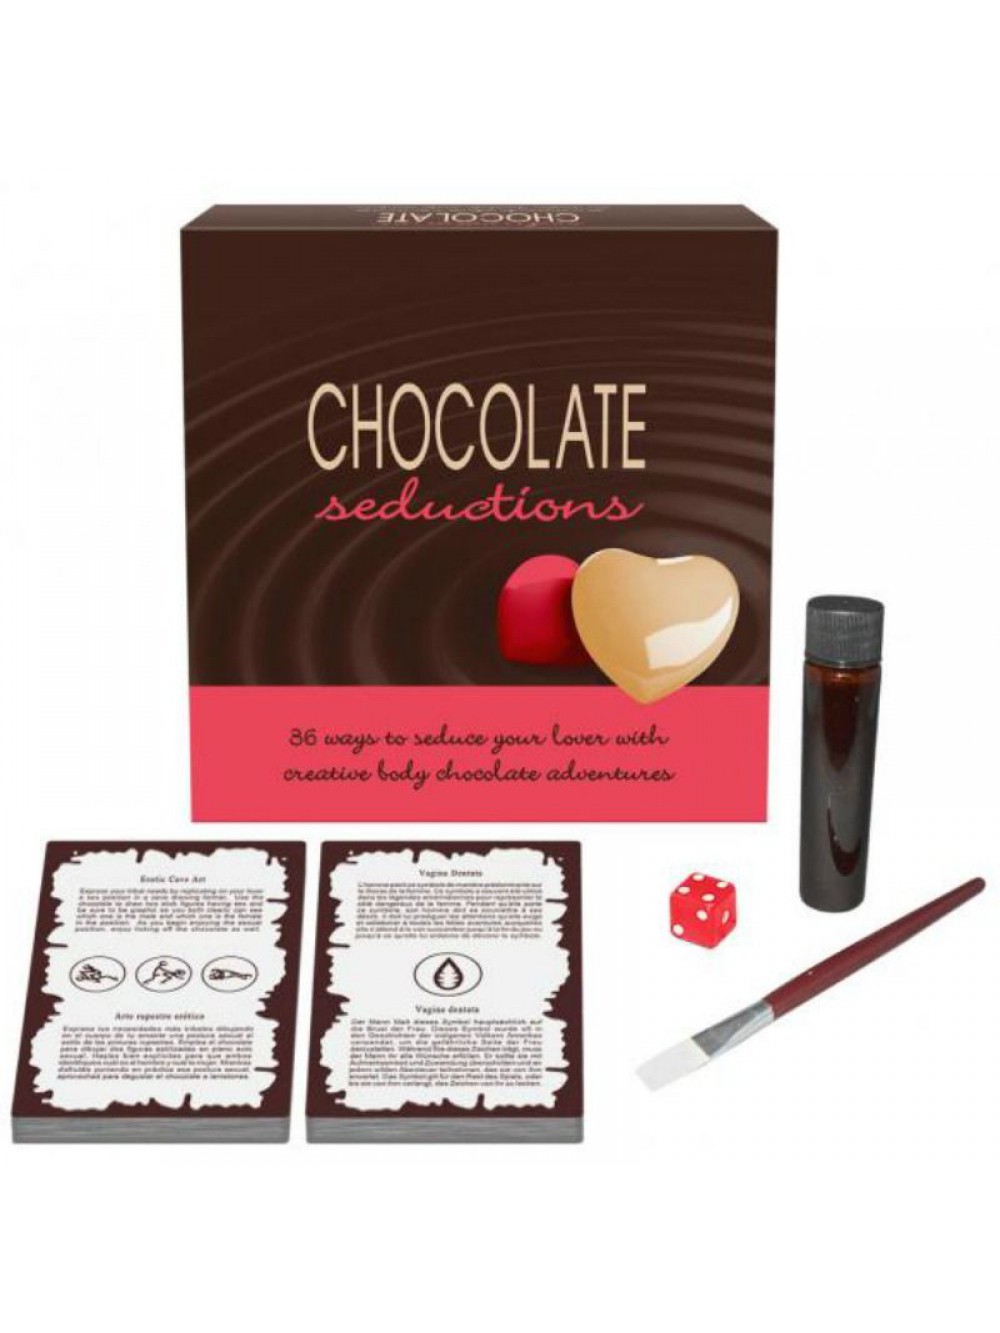 KHEPER GAMES - 36 WAYS TO SEDUCE YOUR LOVER CHOCOLATE SEDUCTIONS